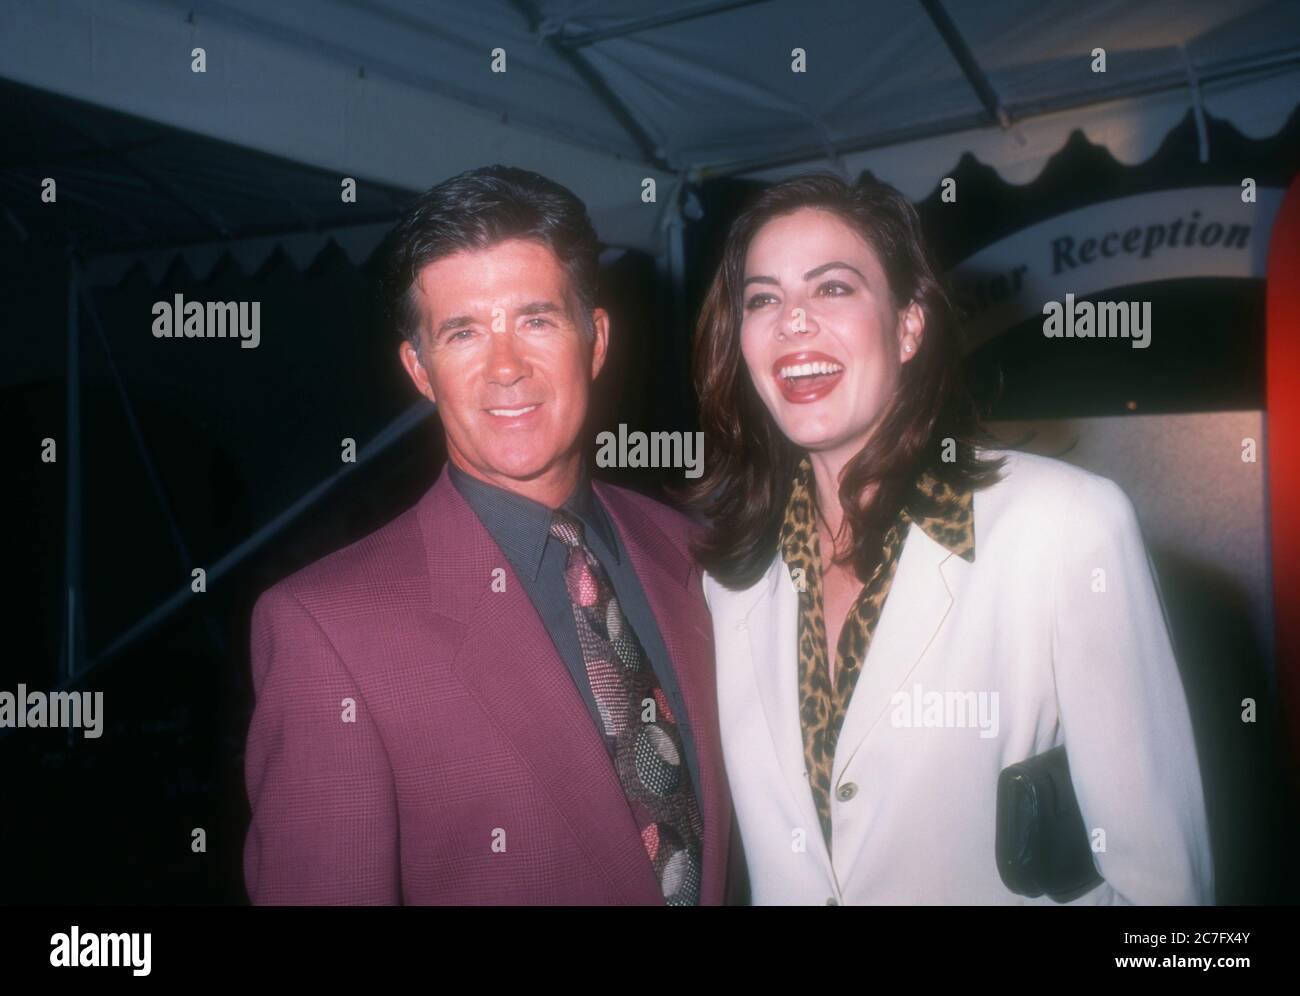 Pasadena, California, USA 15th January 1996 Actor Alan Thicke and Gina Tolleson attend NBC All Star Reception at Winter TCA Press Tour on January 15, 1996 at Ritz-Carlton Hotel in Pasadena, California, USA. Photo by Barry King/Alamy Stock Photo Stock Photo